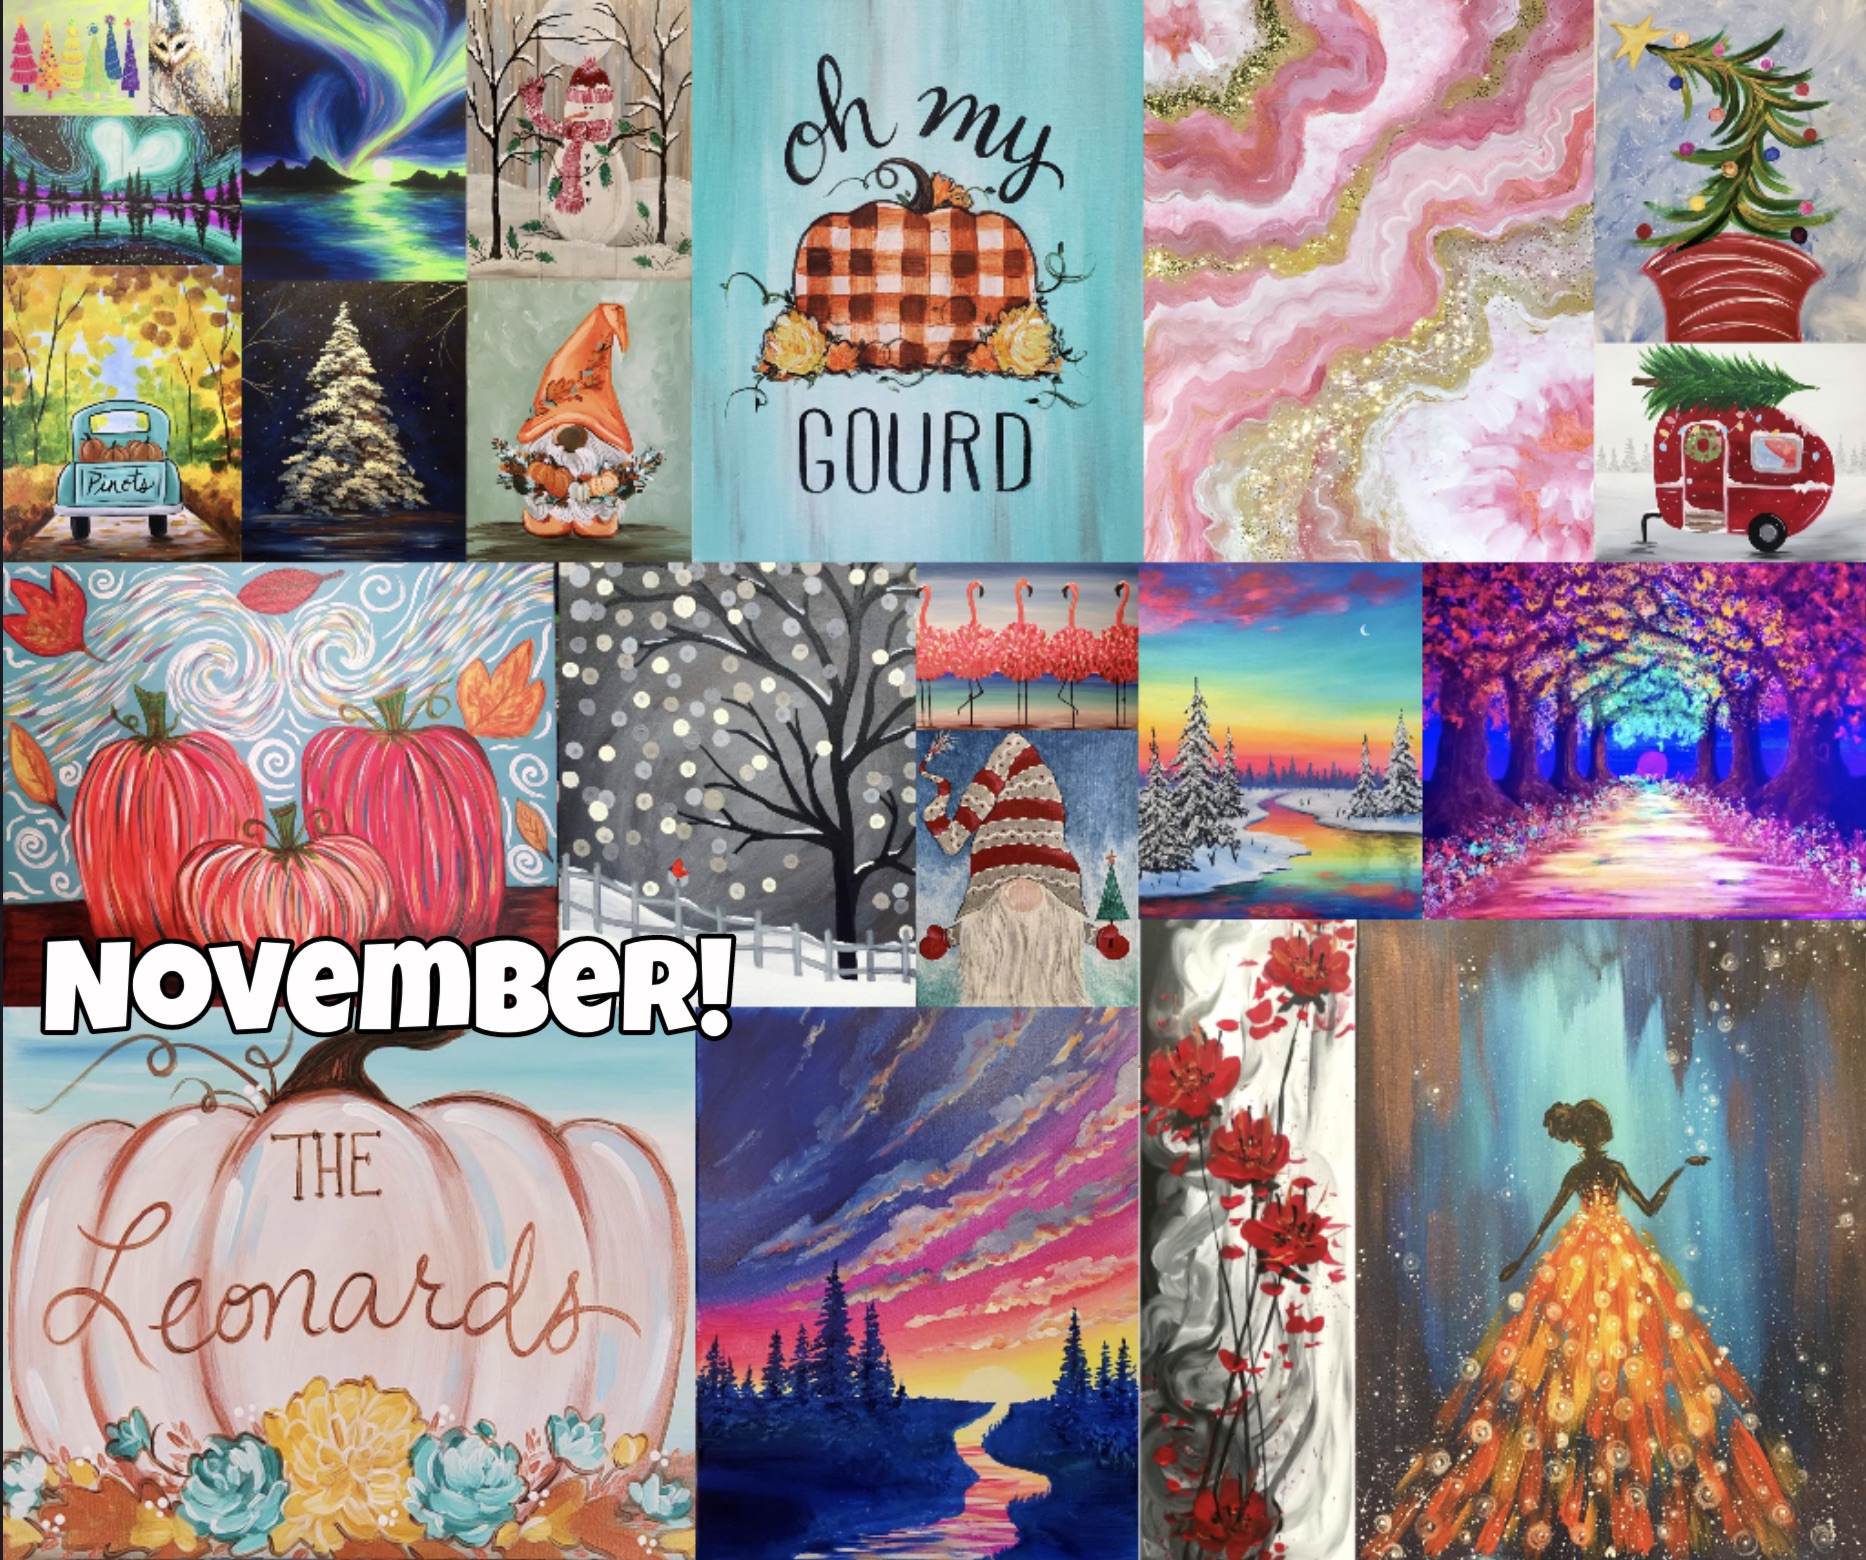 Check out our November paintings